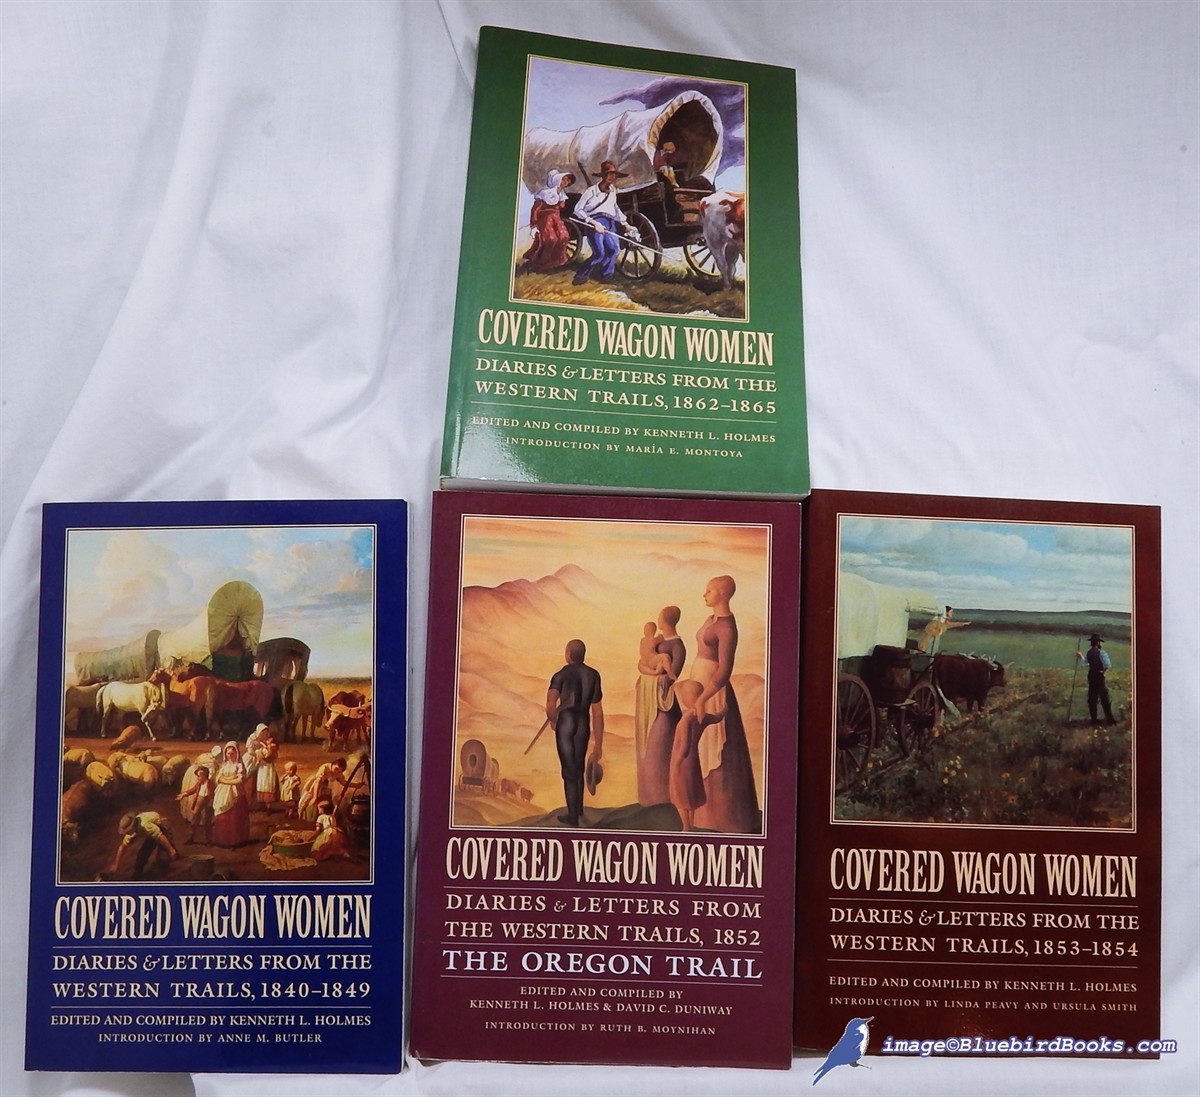 HOLMES, KENNETH L. (EDITOR) - Covered Wagon Women: Diaries & Letters from the Western Trails, Volumes 1, 5, 6 & 8